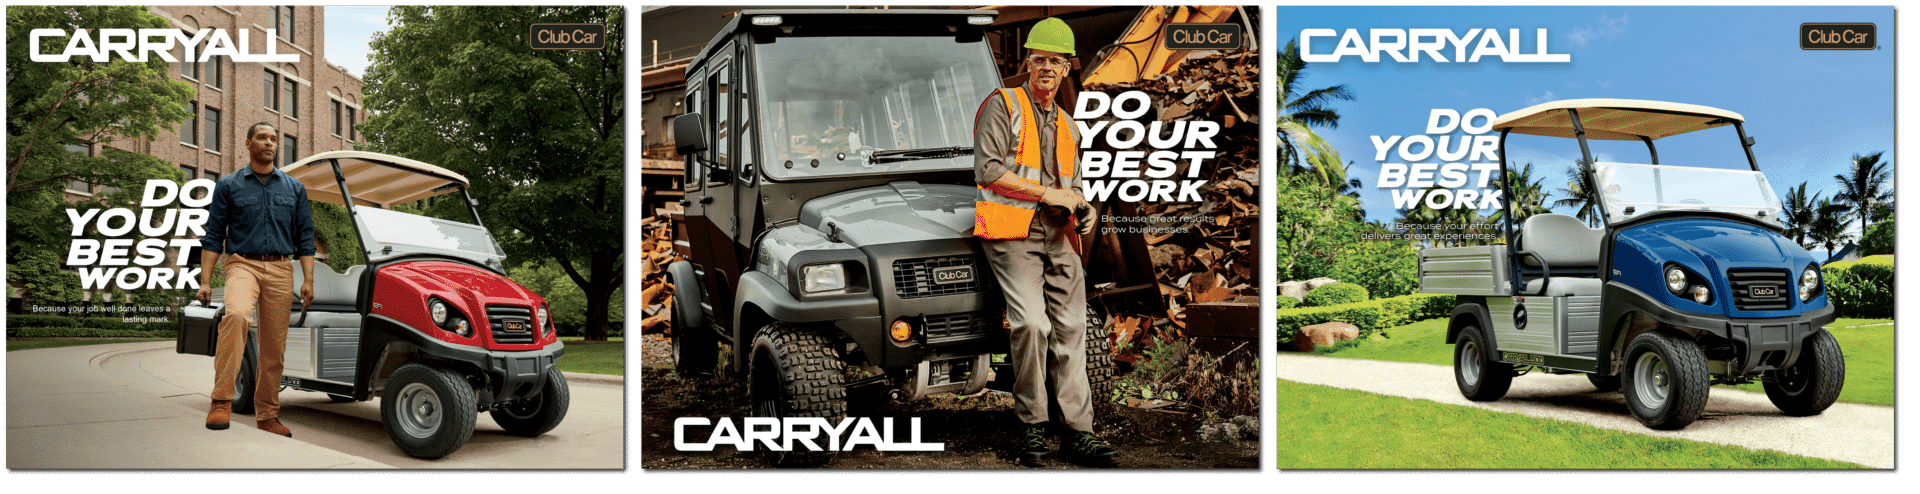 Club Car Carryall Utility Vehicles Do your Best Work combined